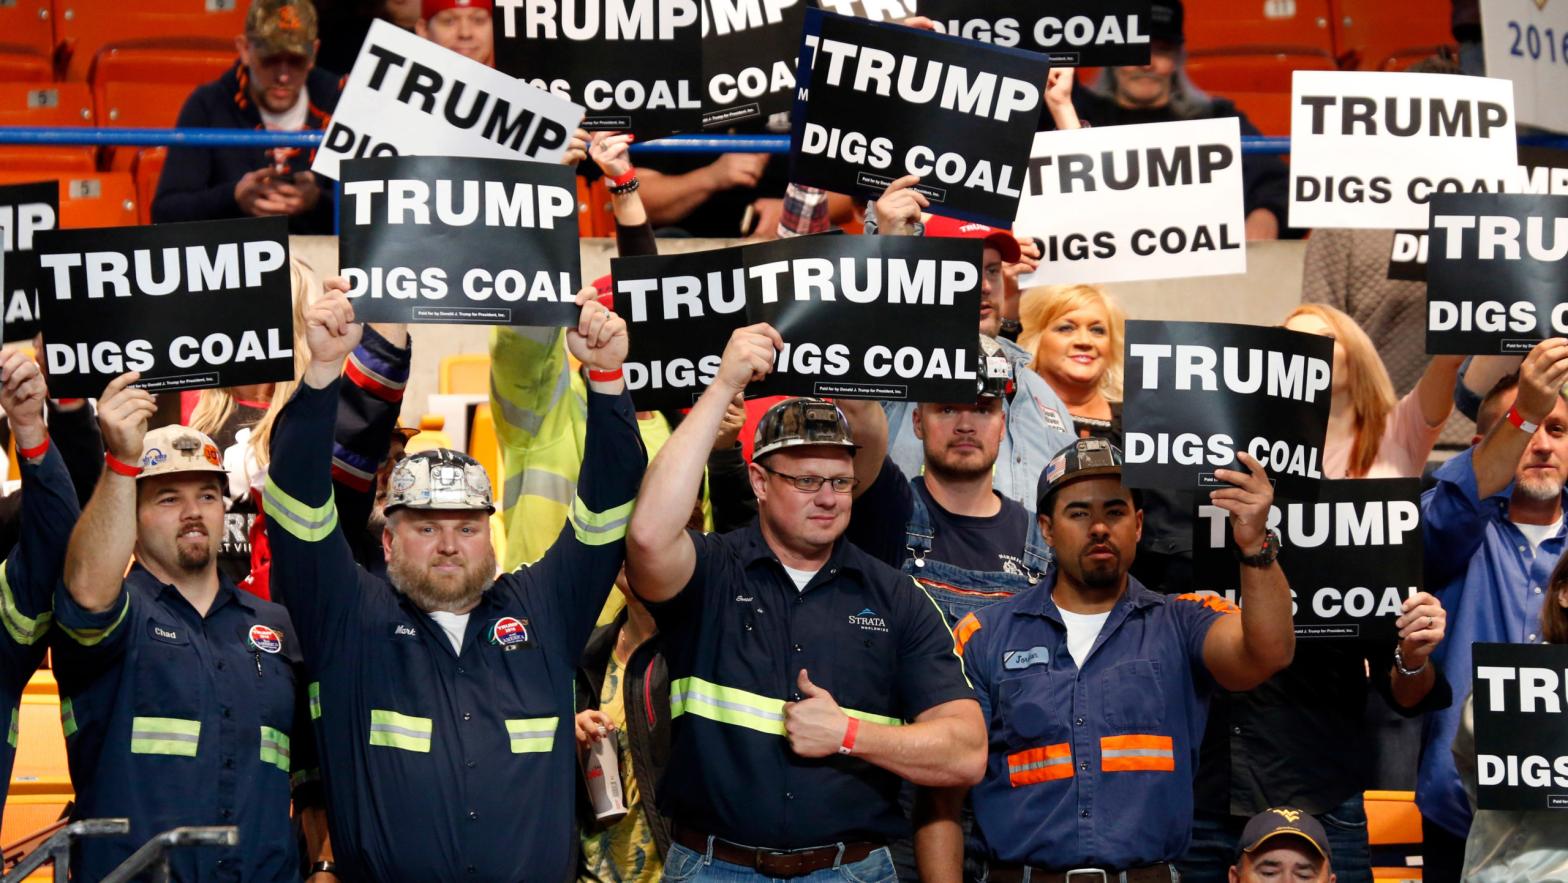 A group of coal miners wave signs for Donald Trump. (Photo: Steve Helber, AP)